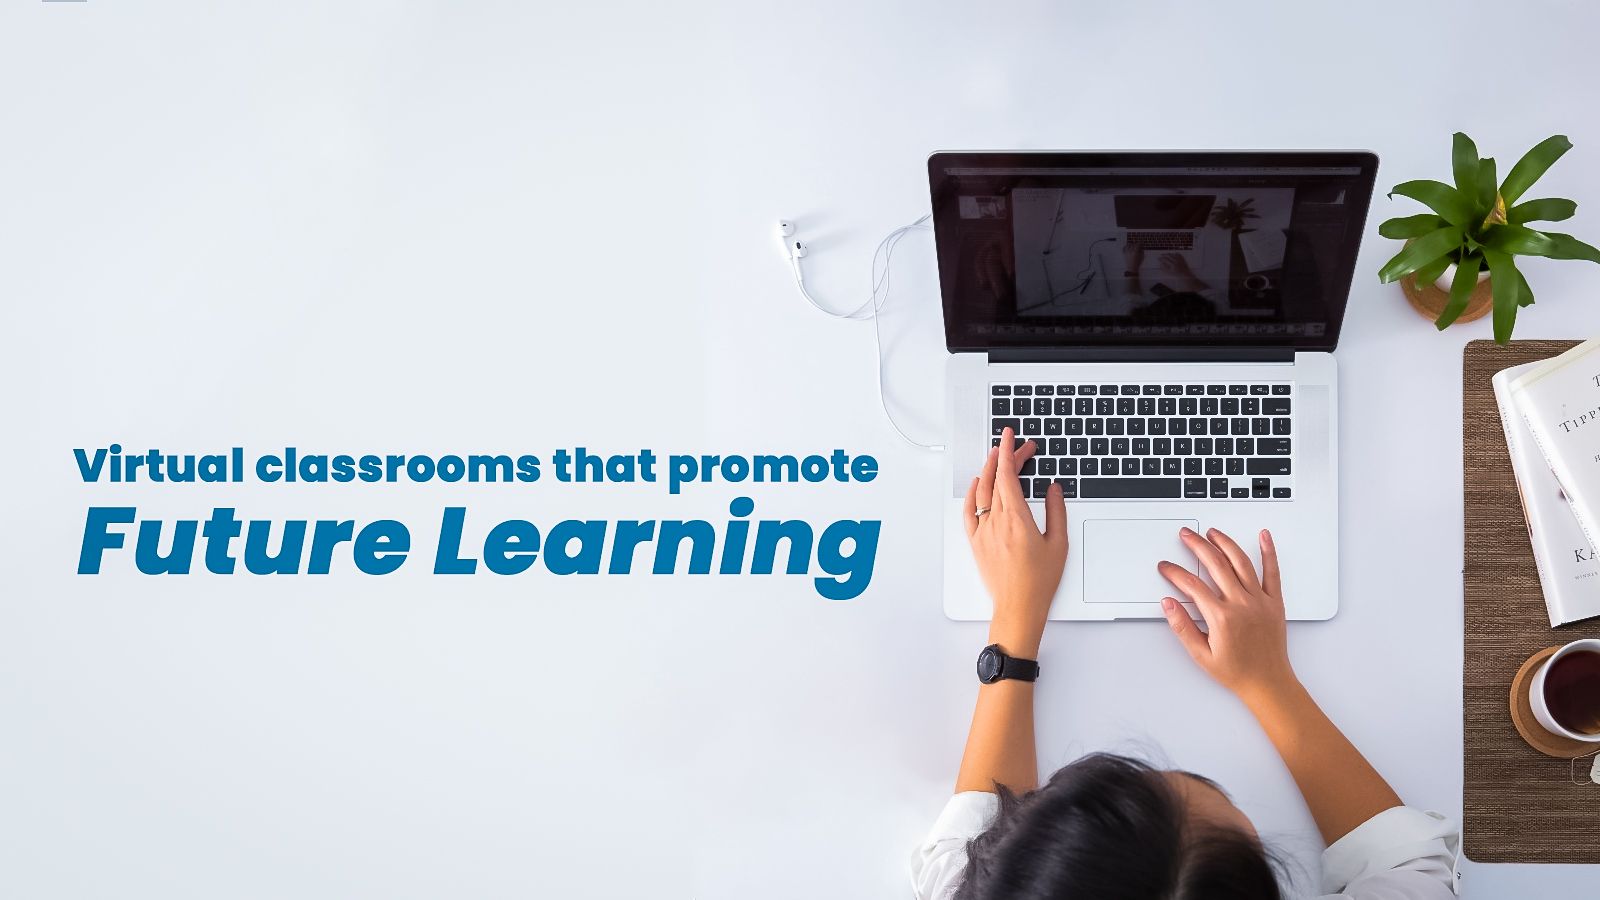 Virtual classrooms that promote future learning